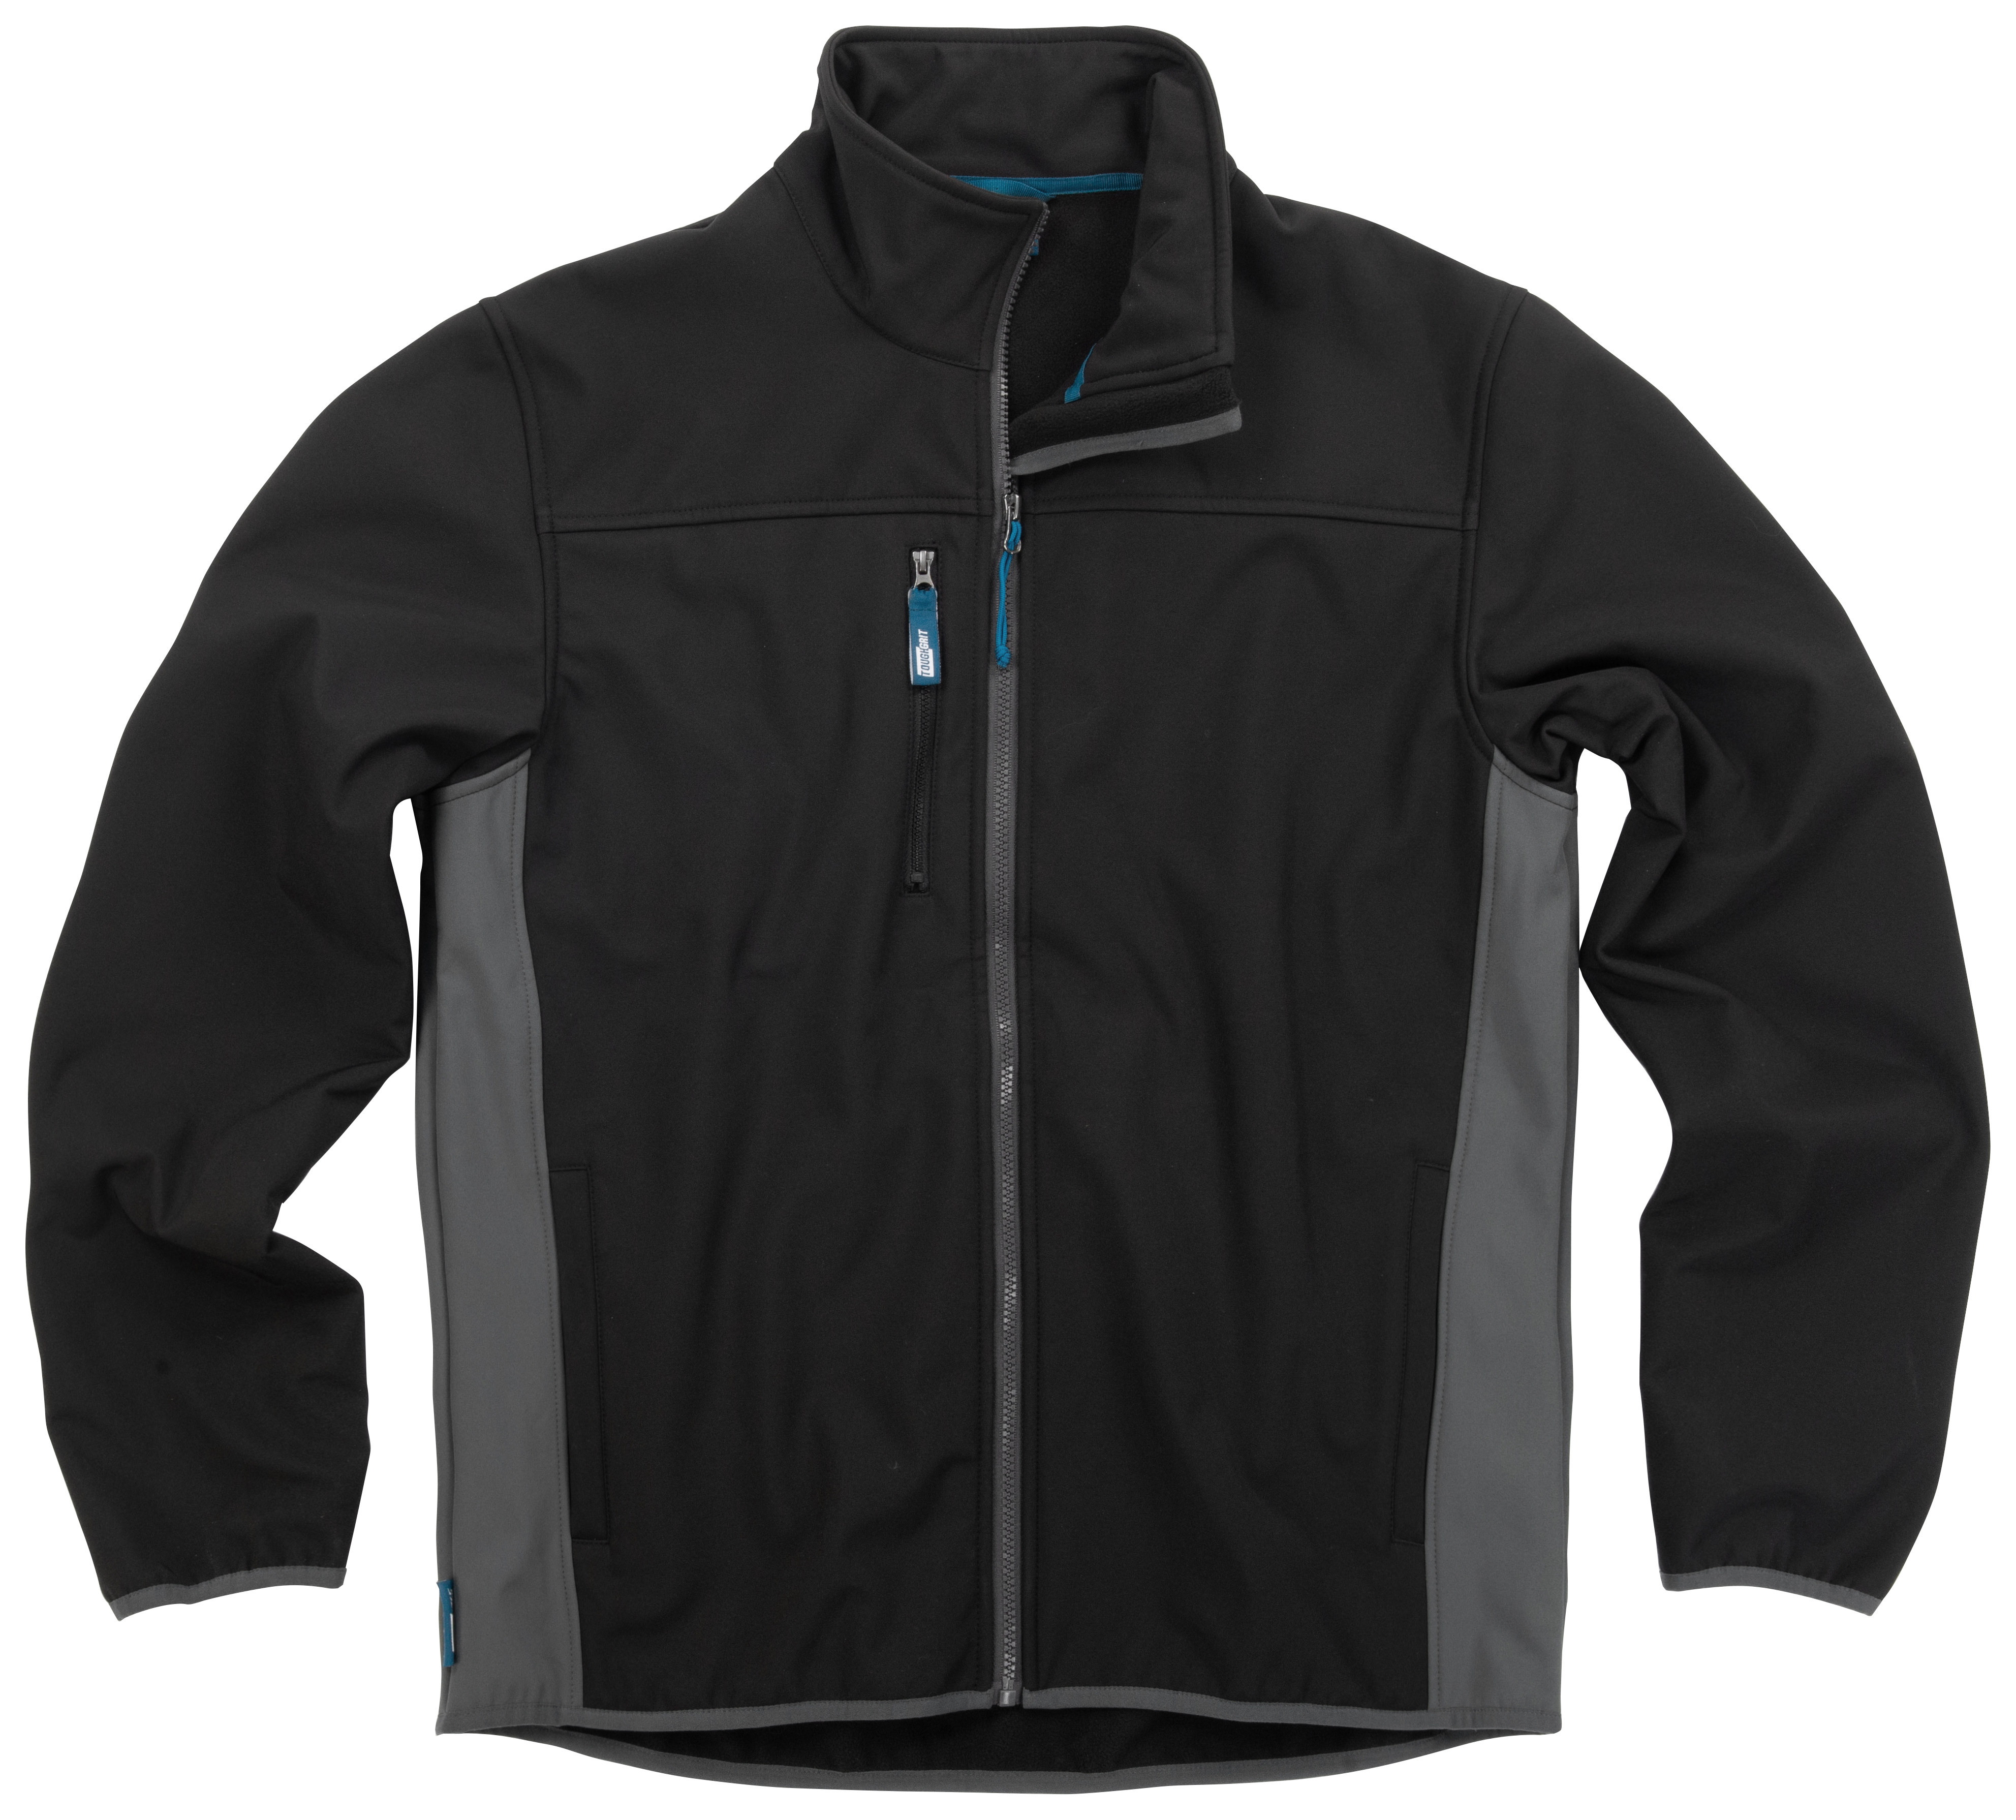 Image of Tough Grit Softshell Jacket, in Black and Grey Water-Resistant, Size: M